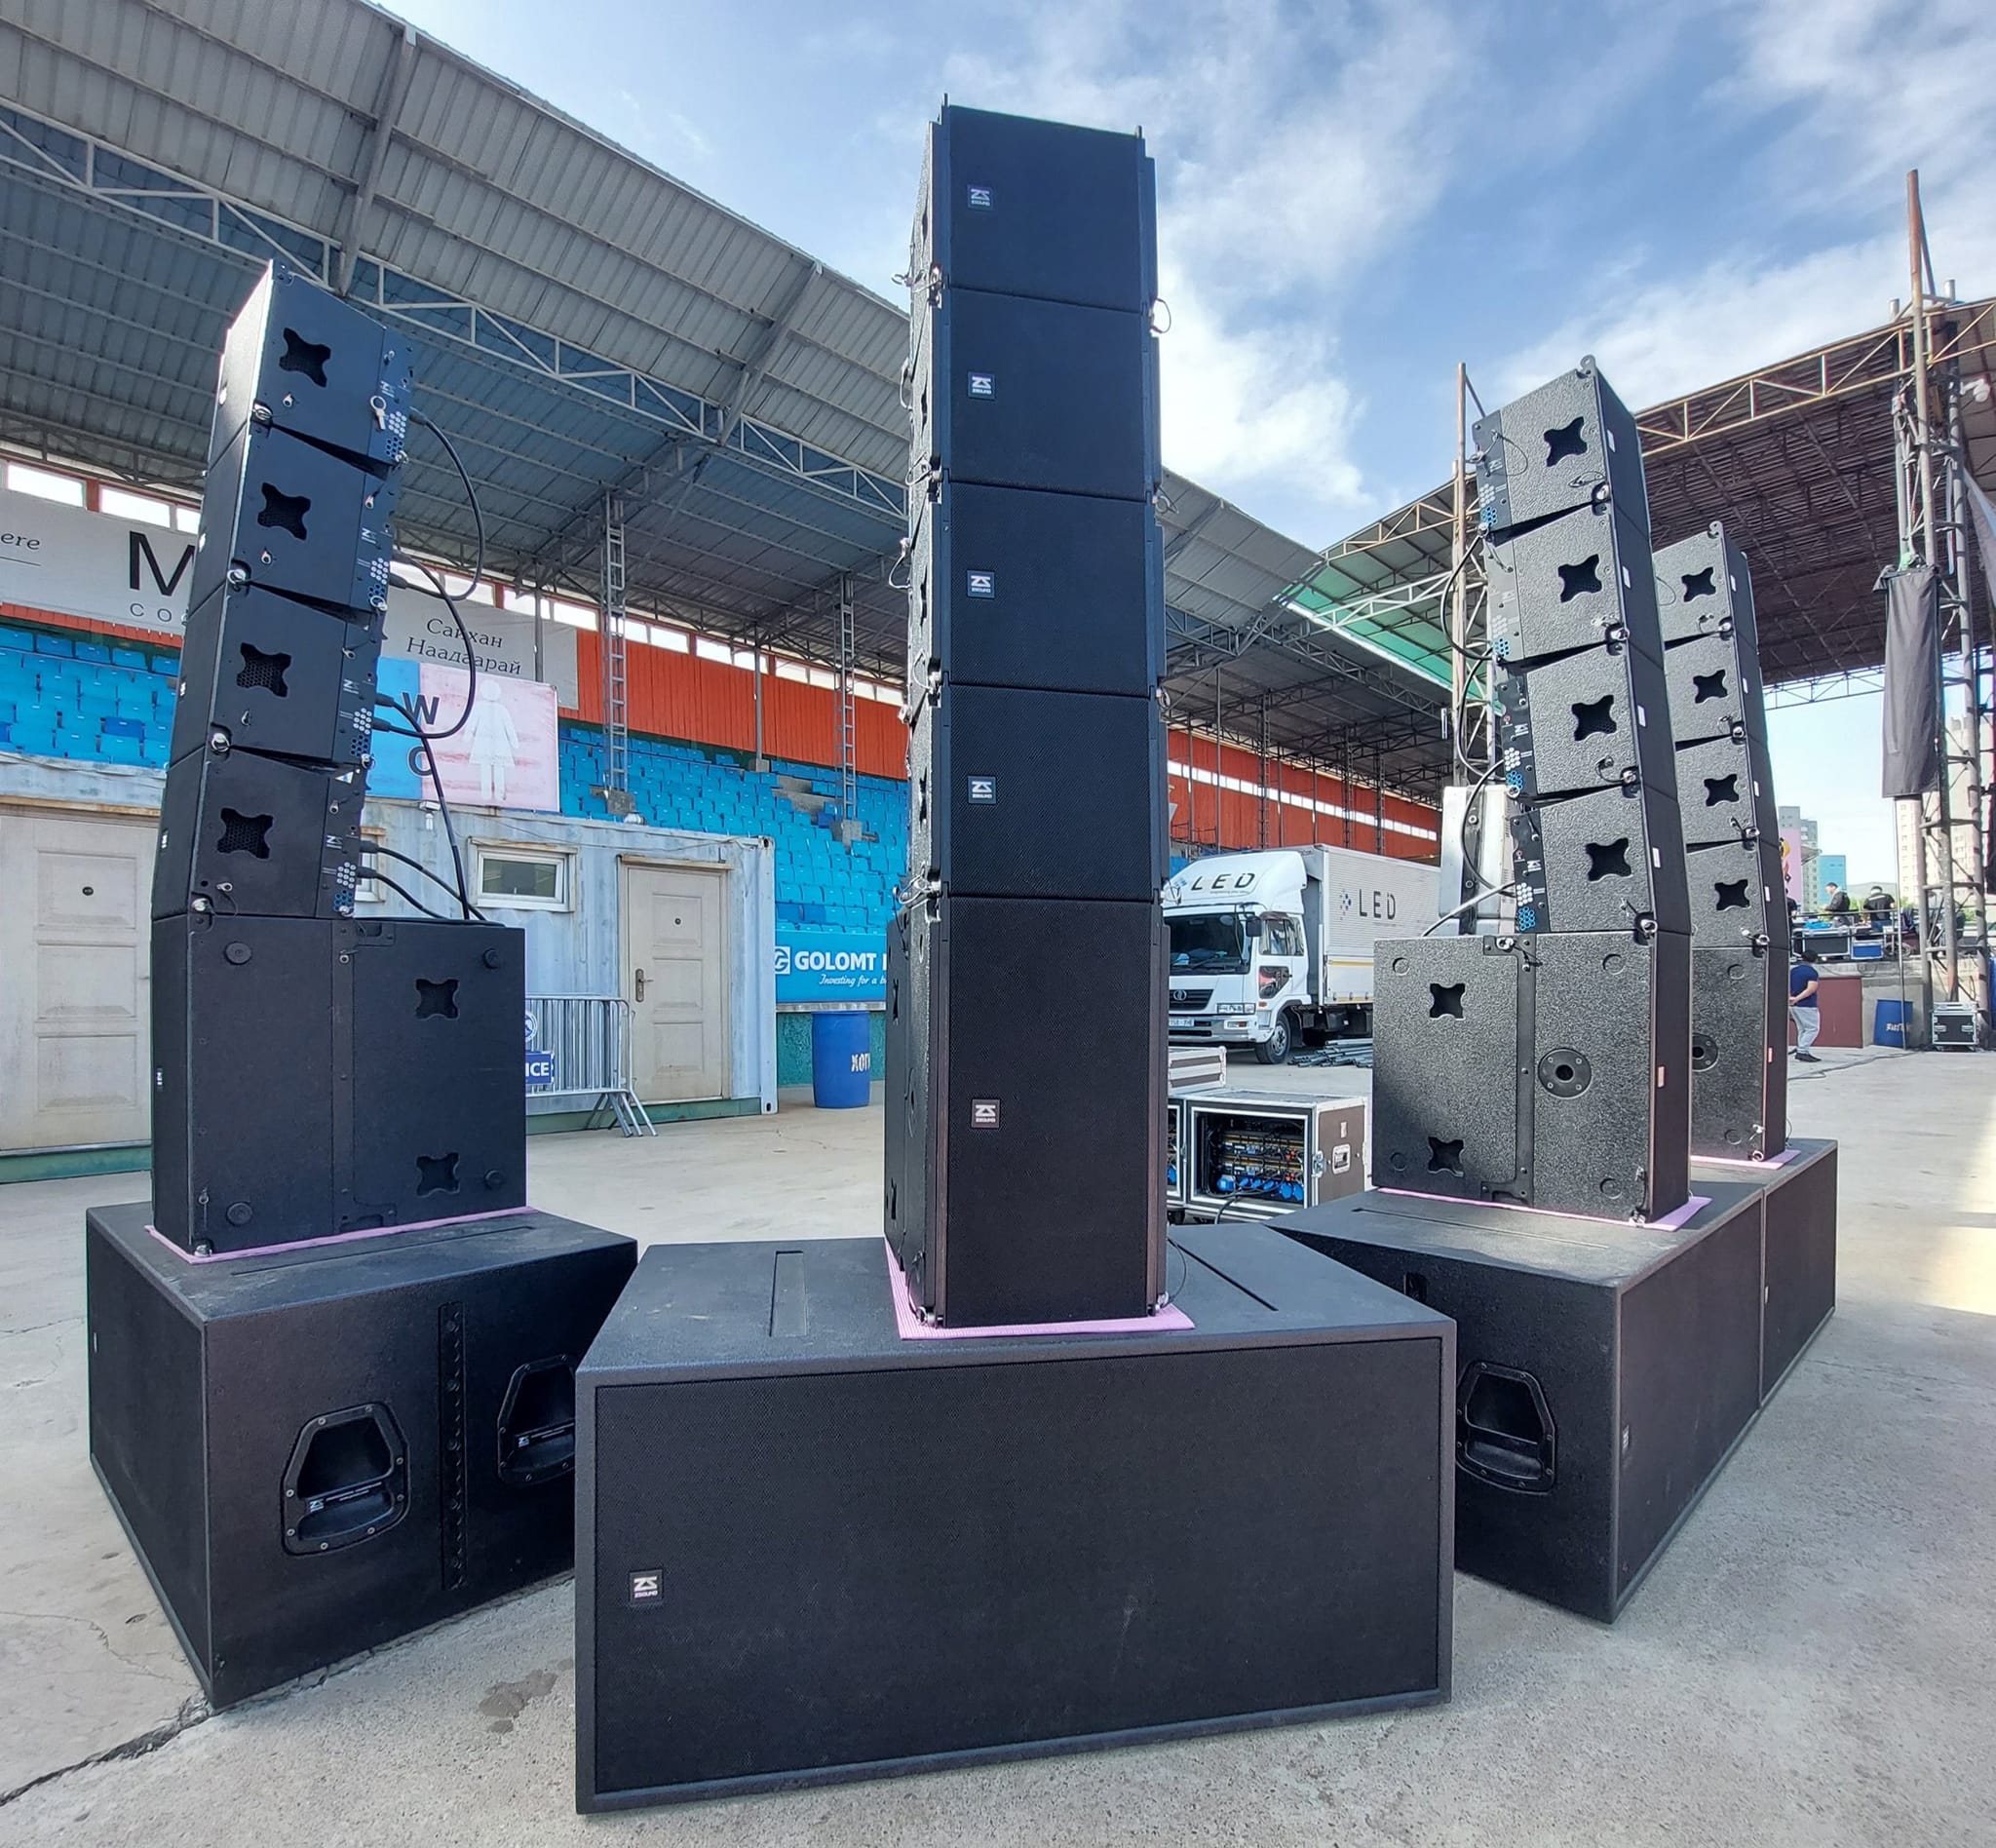 ZSOUND's LC10 and SS2 sound system proved to be the perfect solution for a Mongolian 